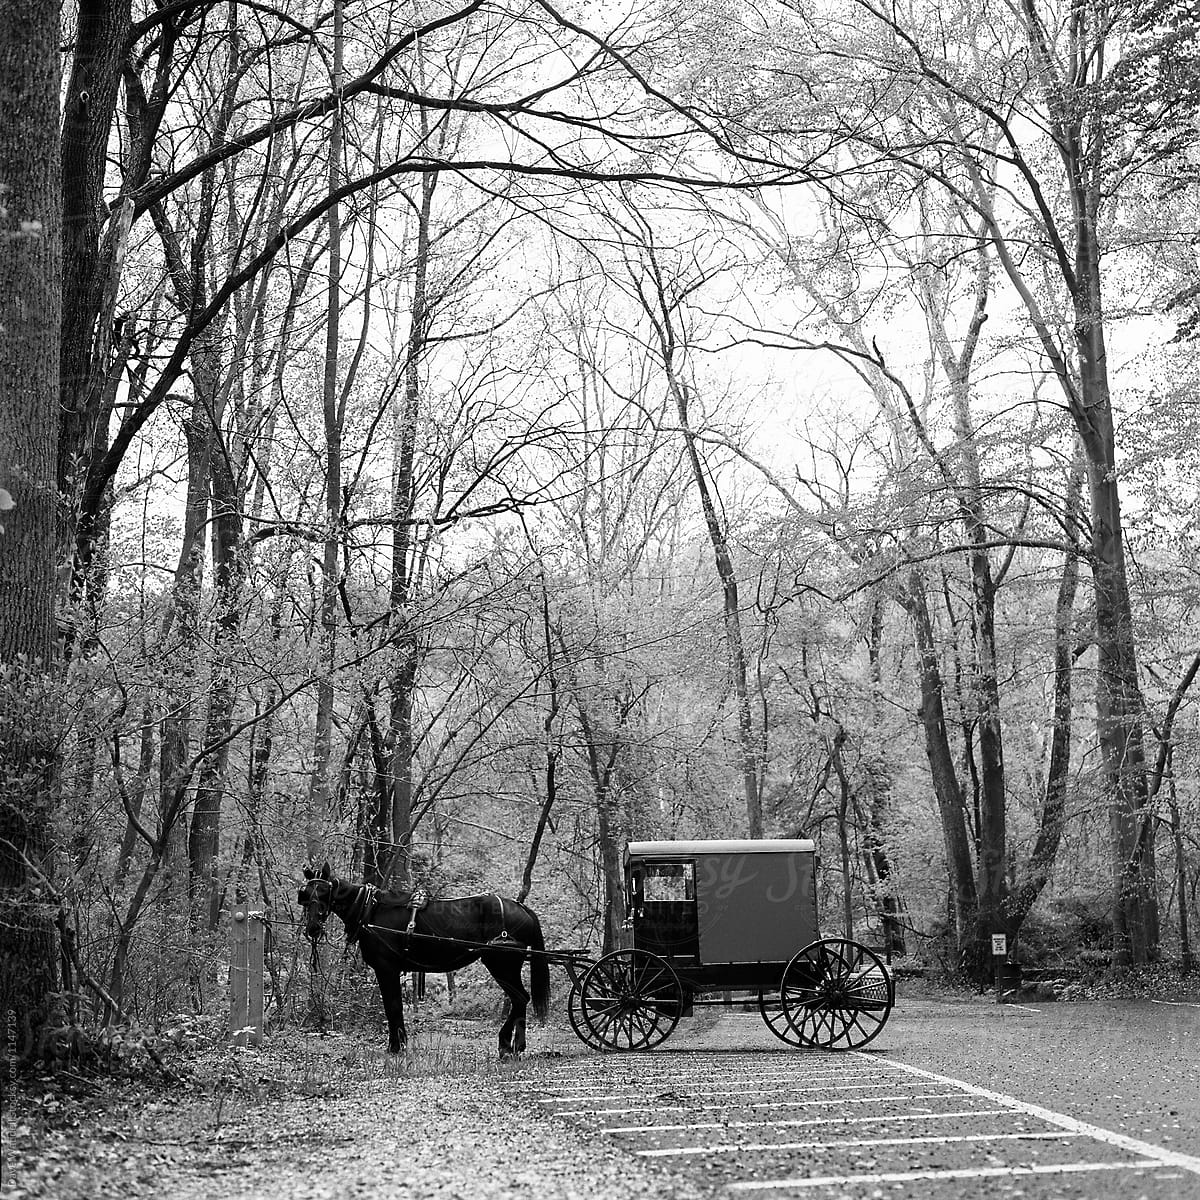 A horse and buggy wait for their owner while parked in a parking lot in the woods